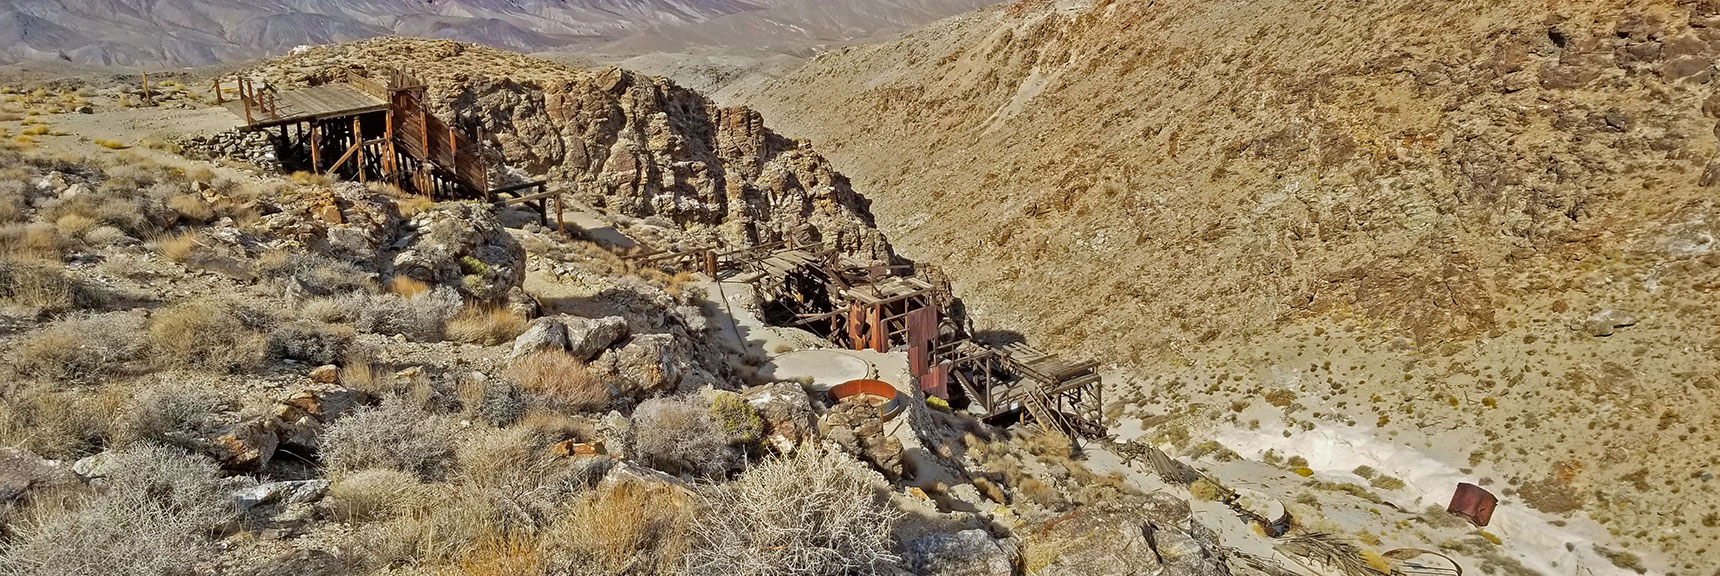 Skidoo Stamp Mill from Above | Skidoo Stamp Mill, Panamint Mountains, Death Valley National Park, CA